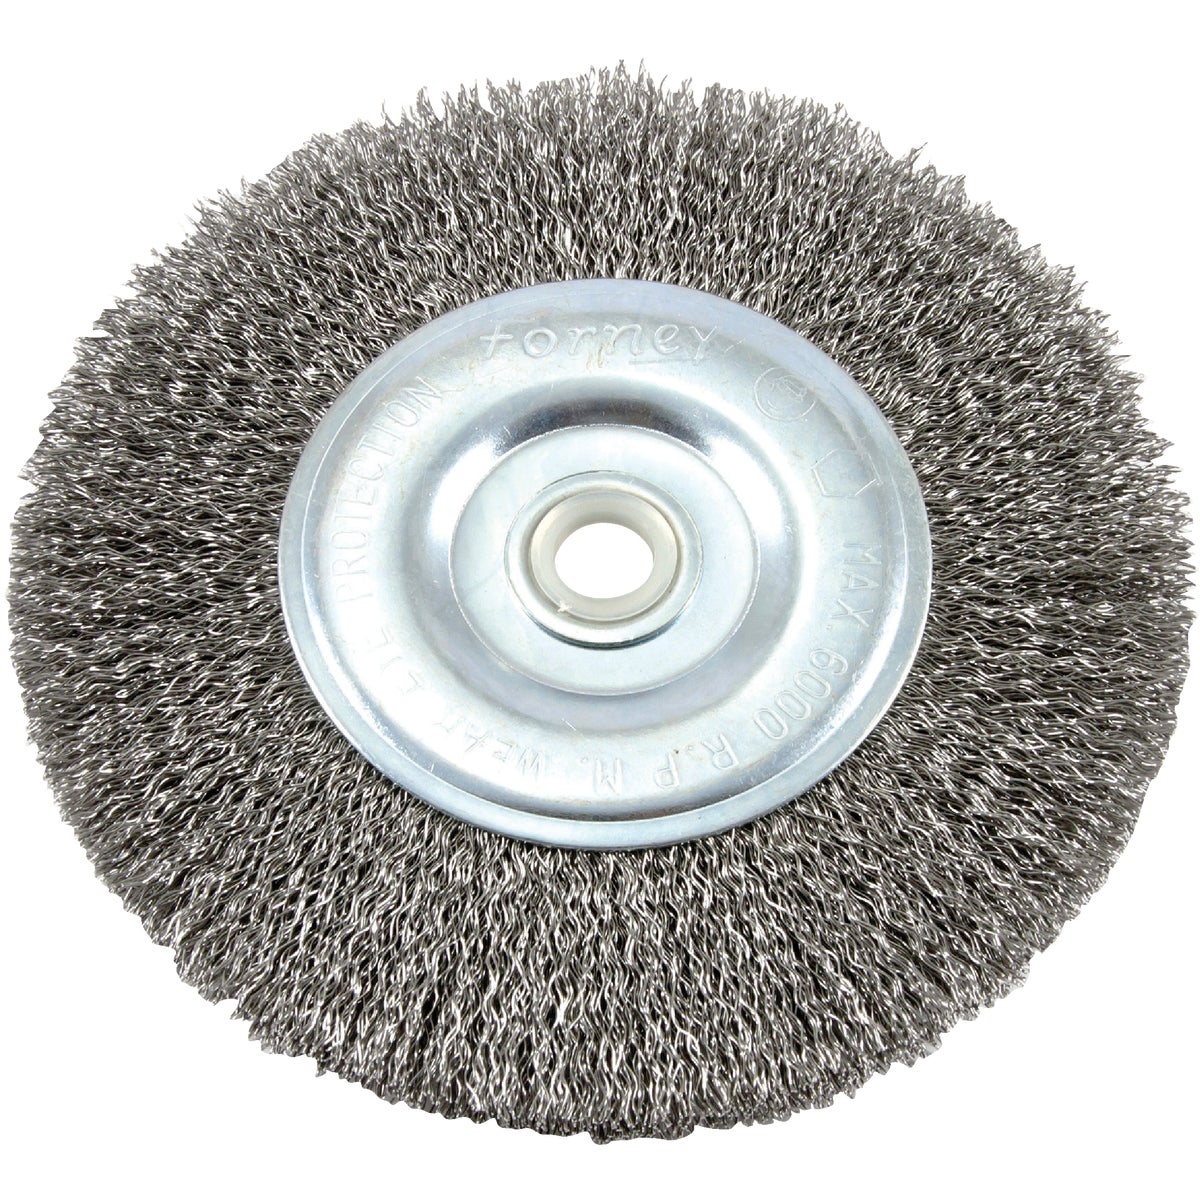 Item 300795, Great for cleaning and blending surfaces, removing light burrs, paint and 